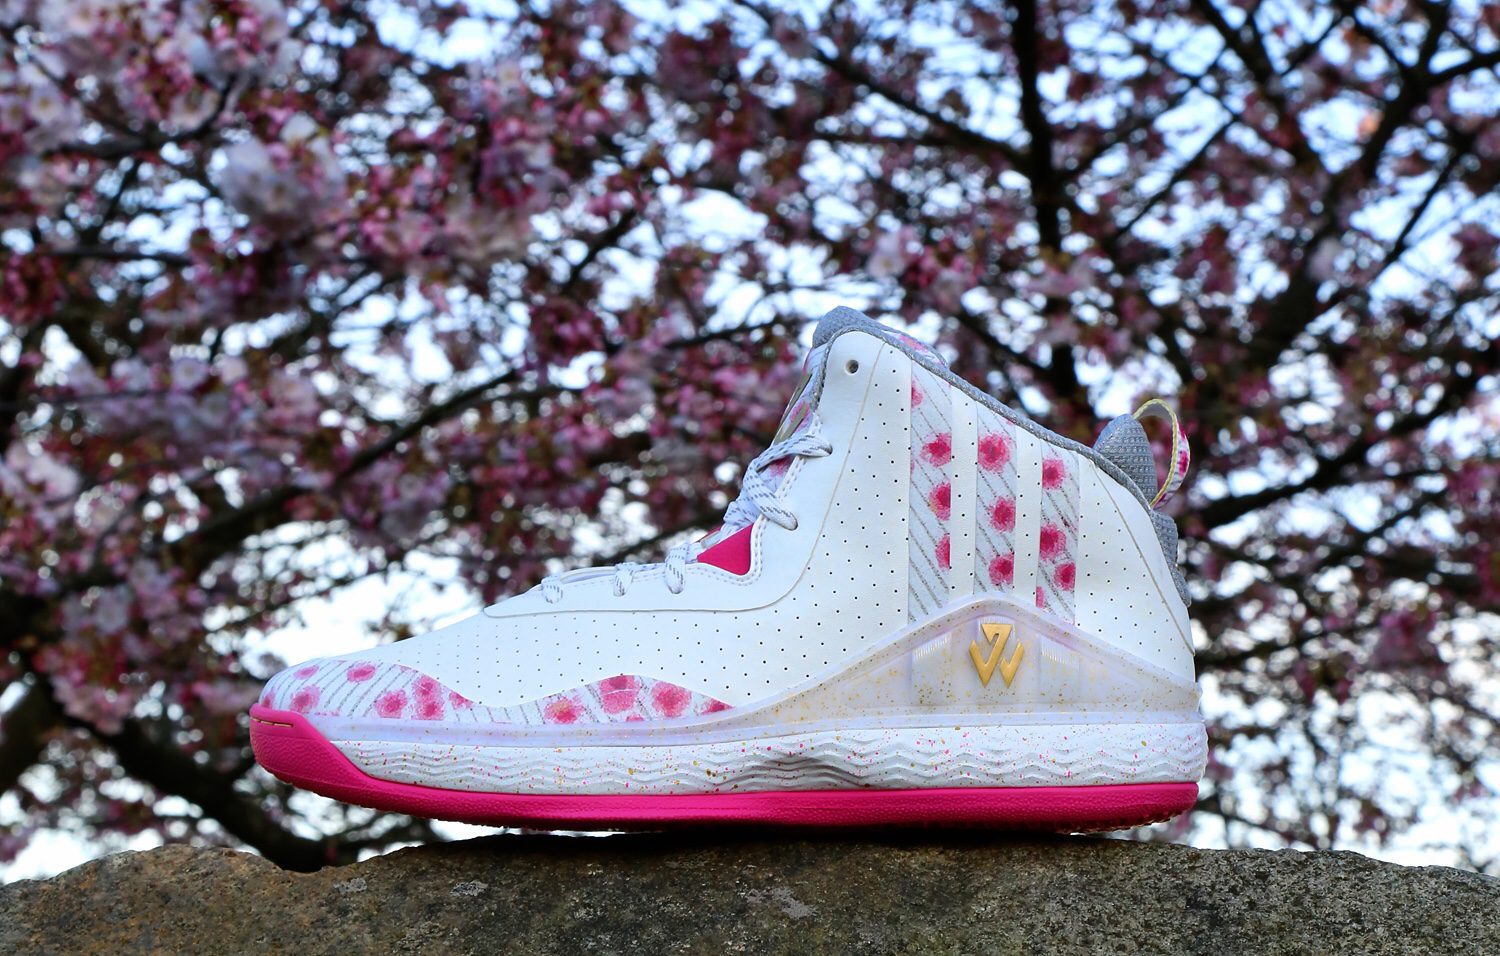 BMF Debut: adidas J Wall 1 Cherry Blossom City Collection) - Hardwood and Hollywood